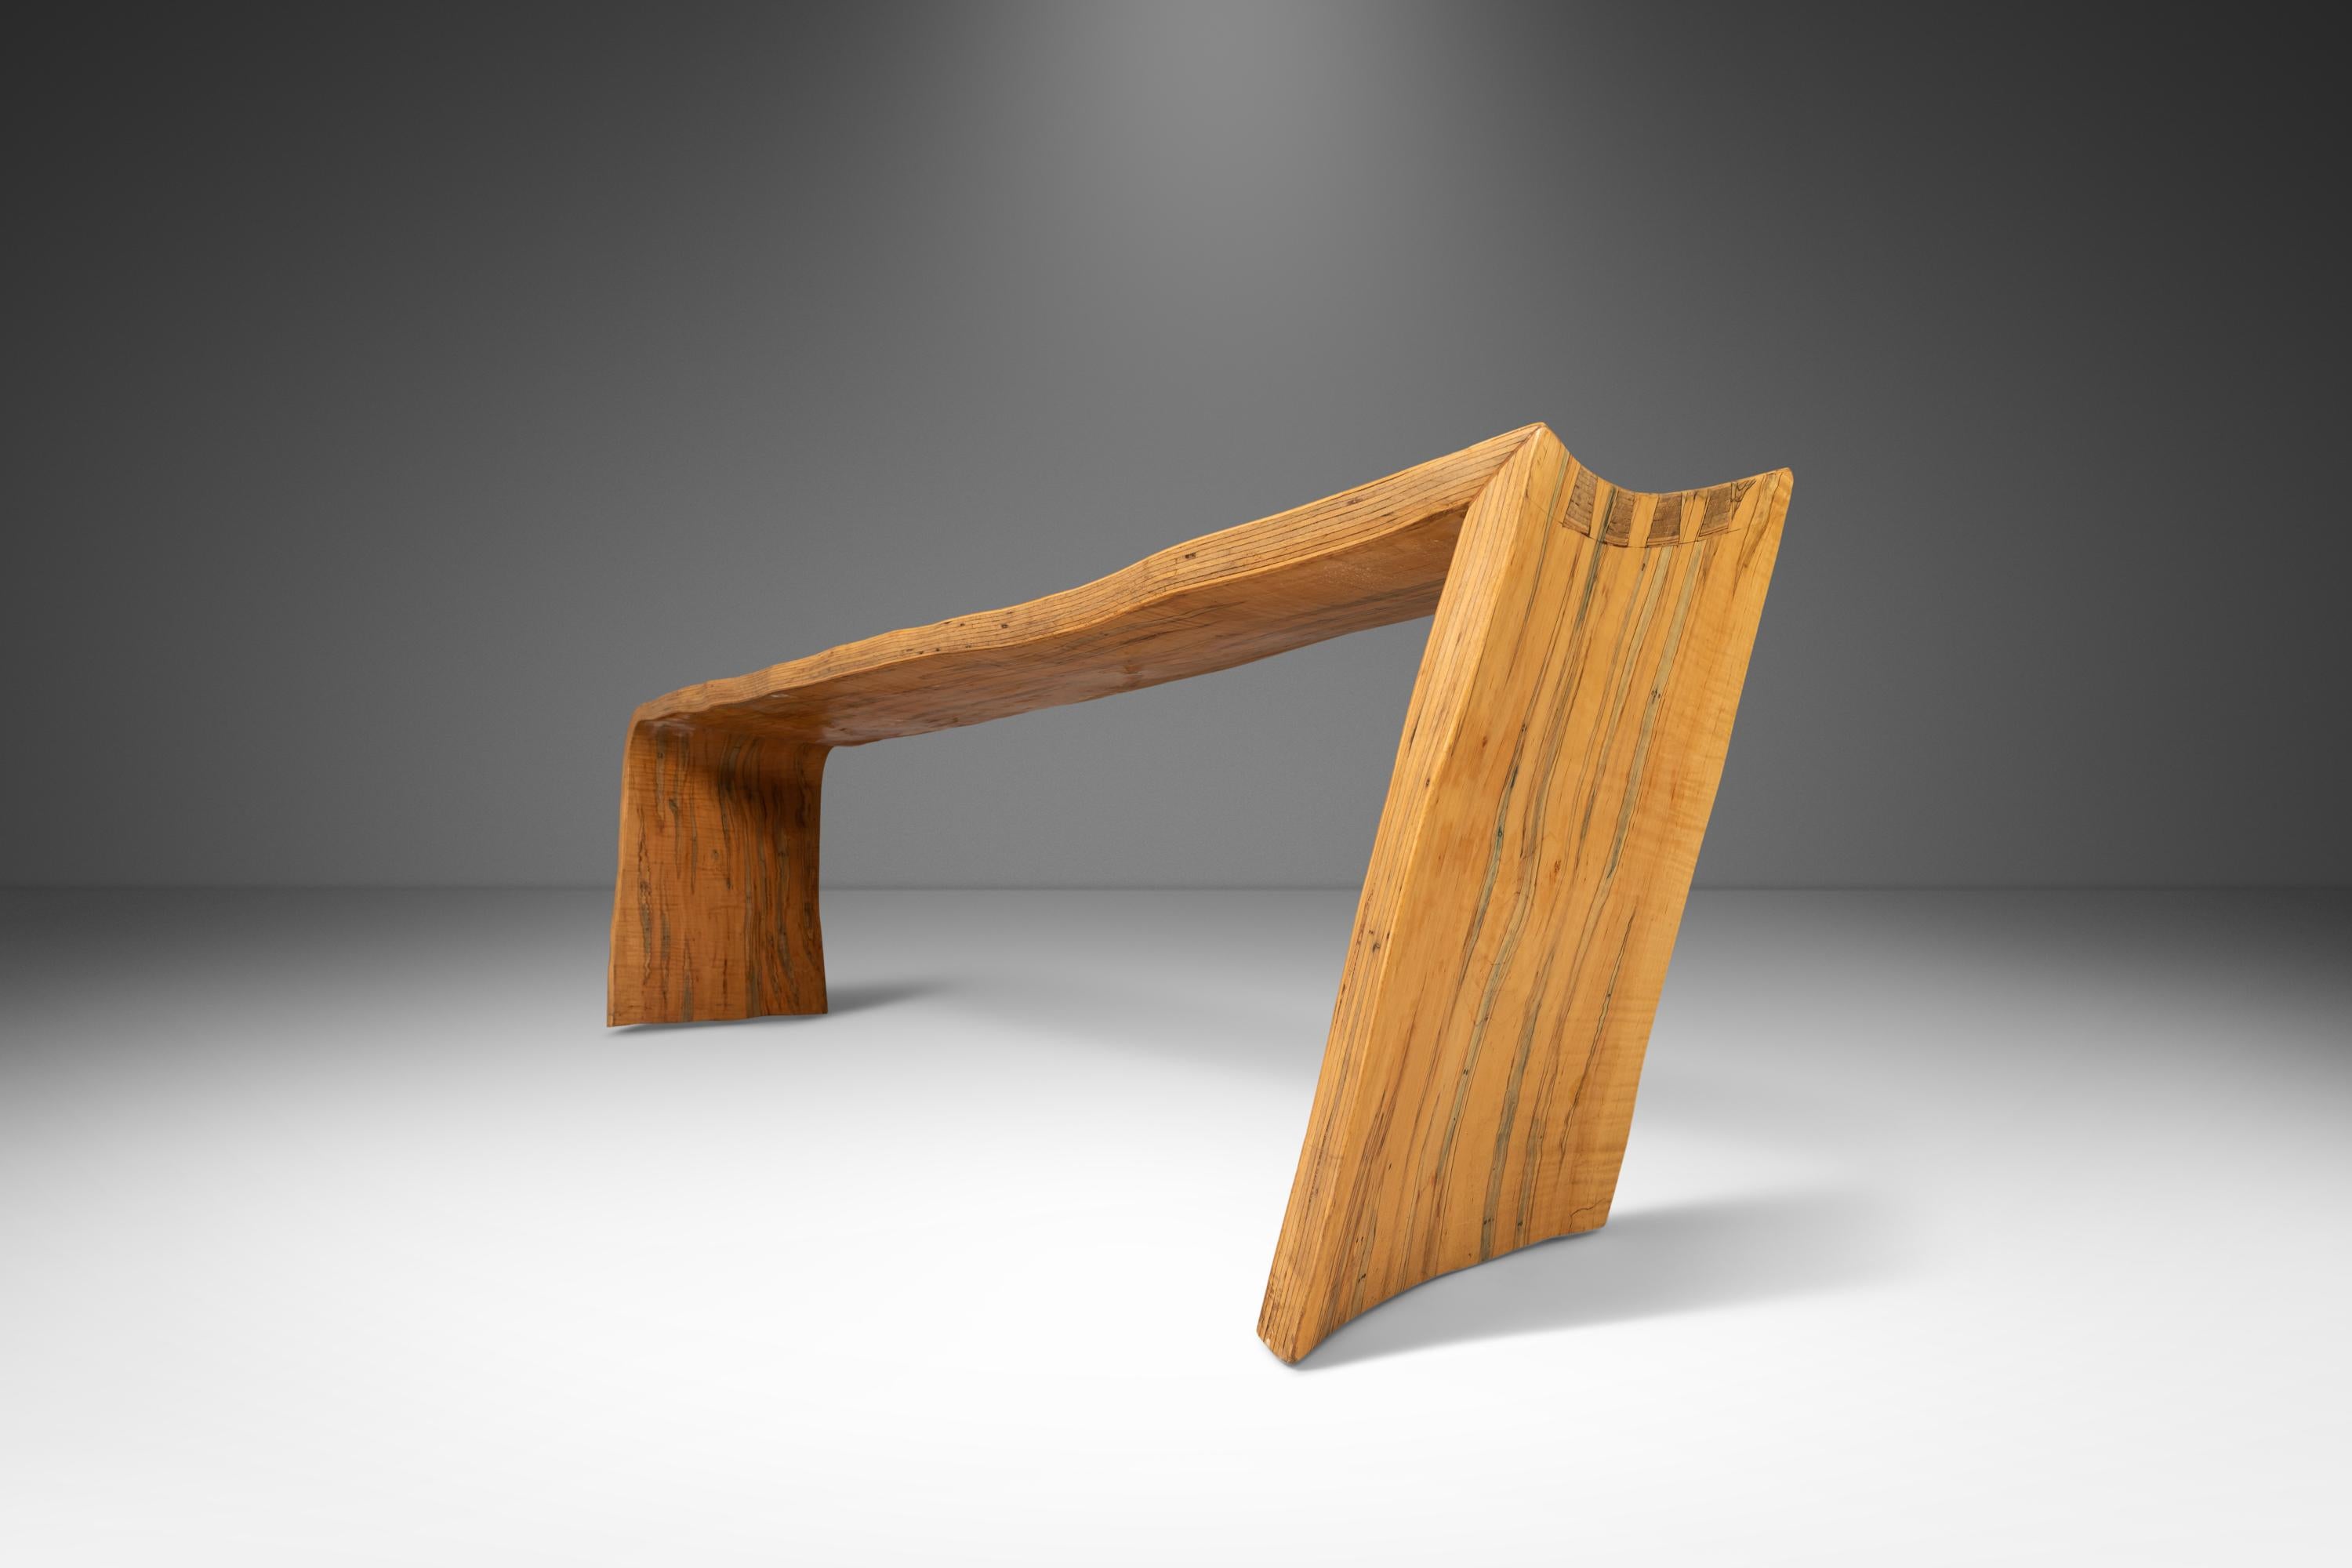 American Bentwood Asymmetrical Abstract Three Seater Bench in Ambrosia Maple, Usa, 1980s For Sale